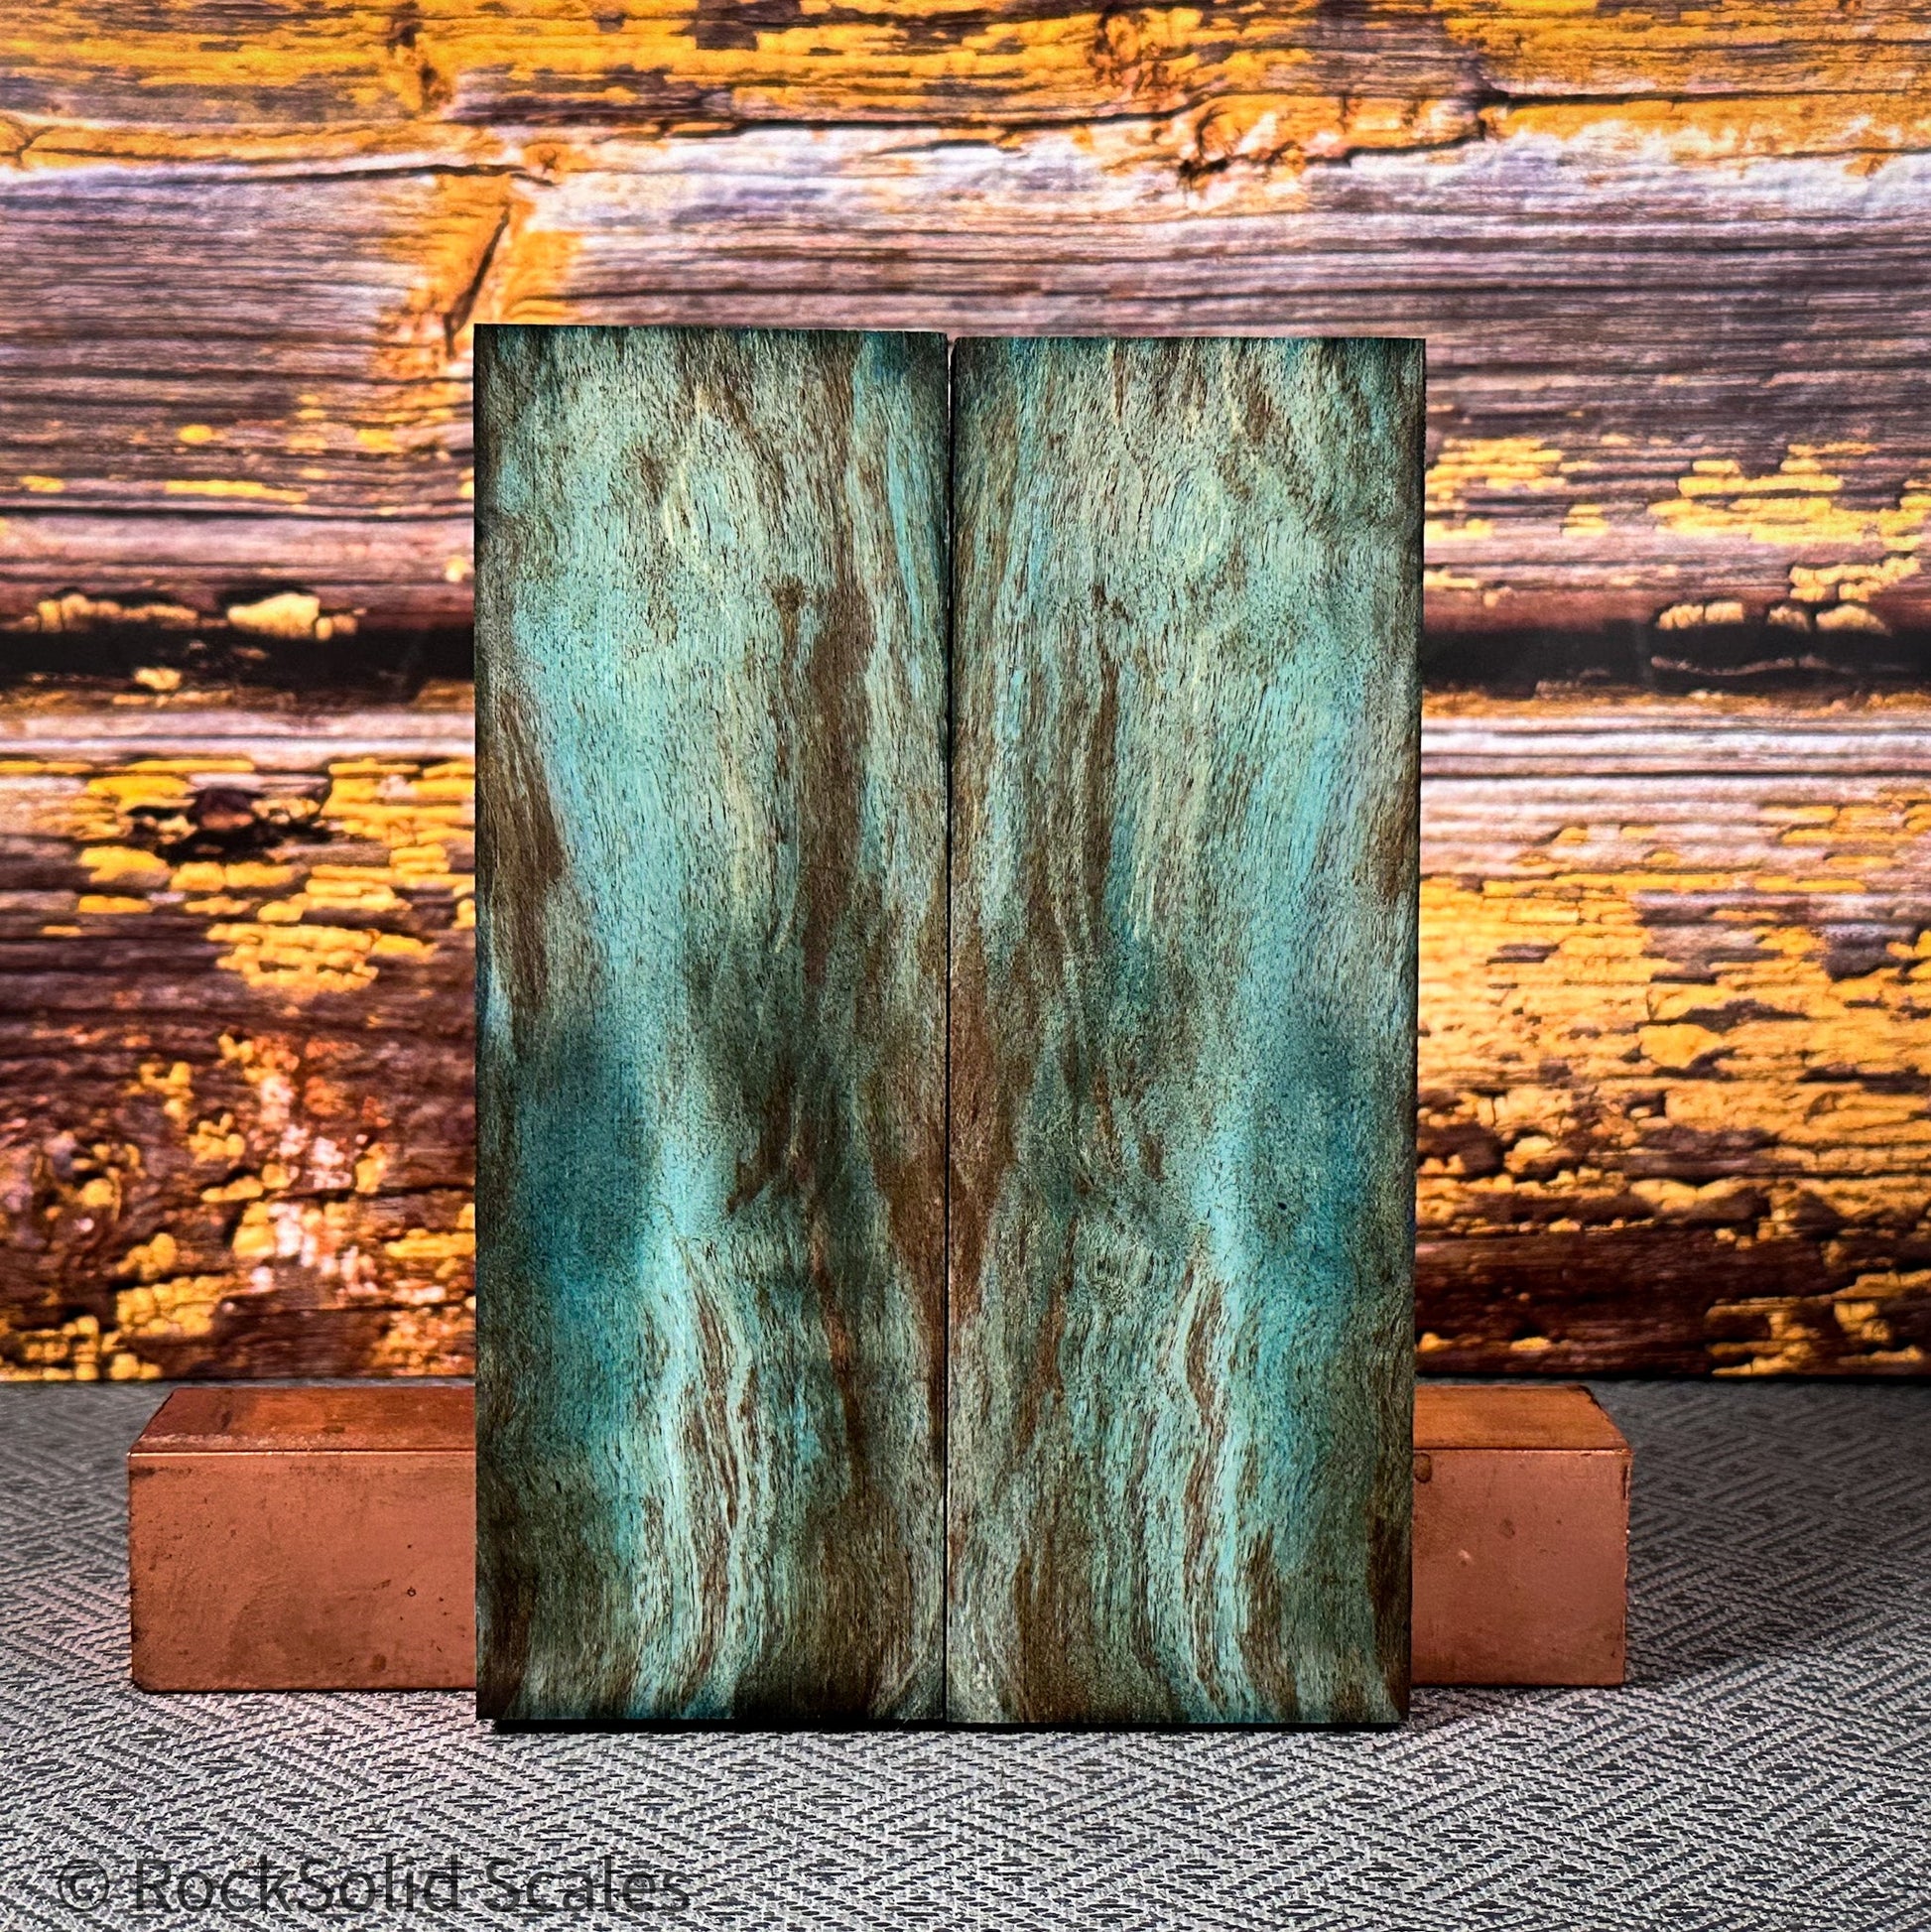 #2354 - Teal Spalted Maple - RockSolid Scales -